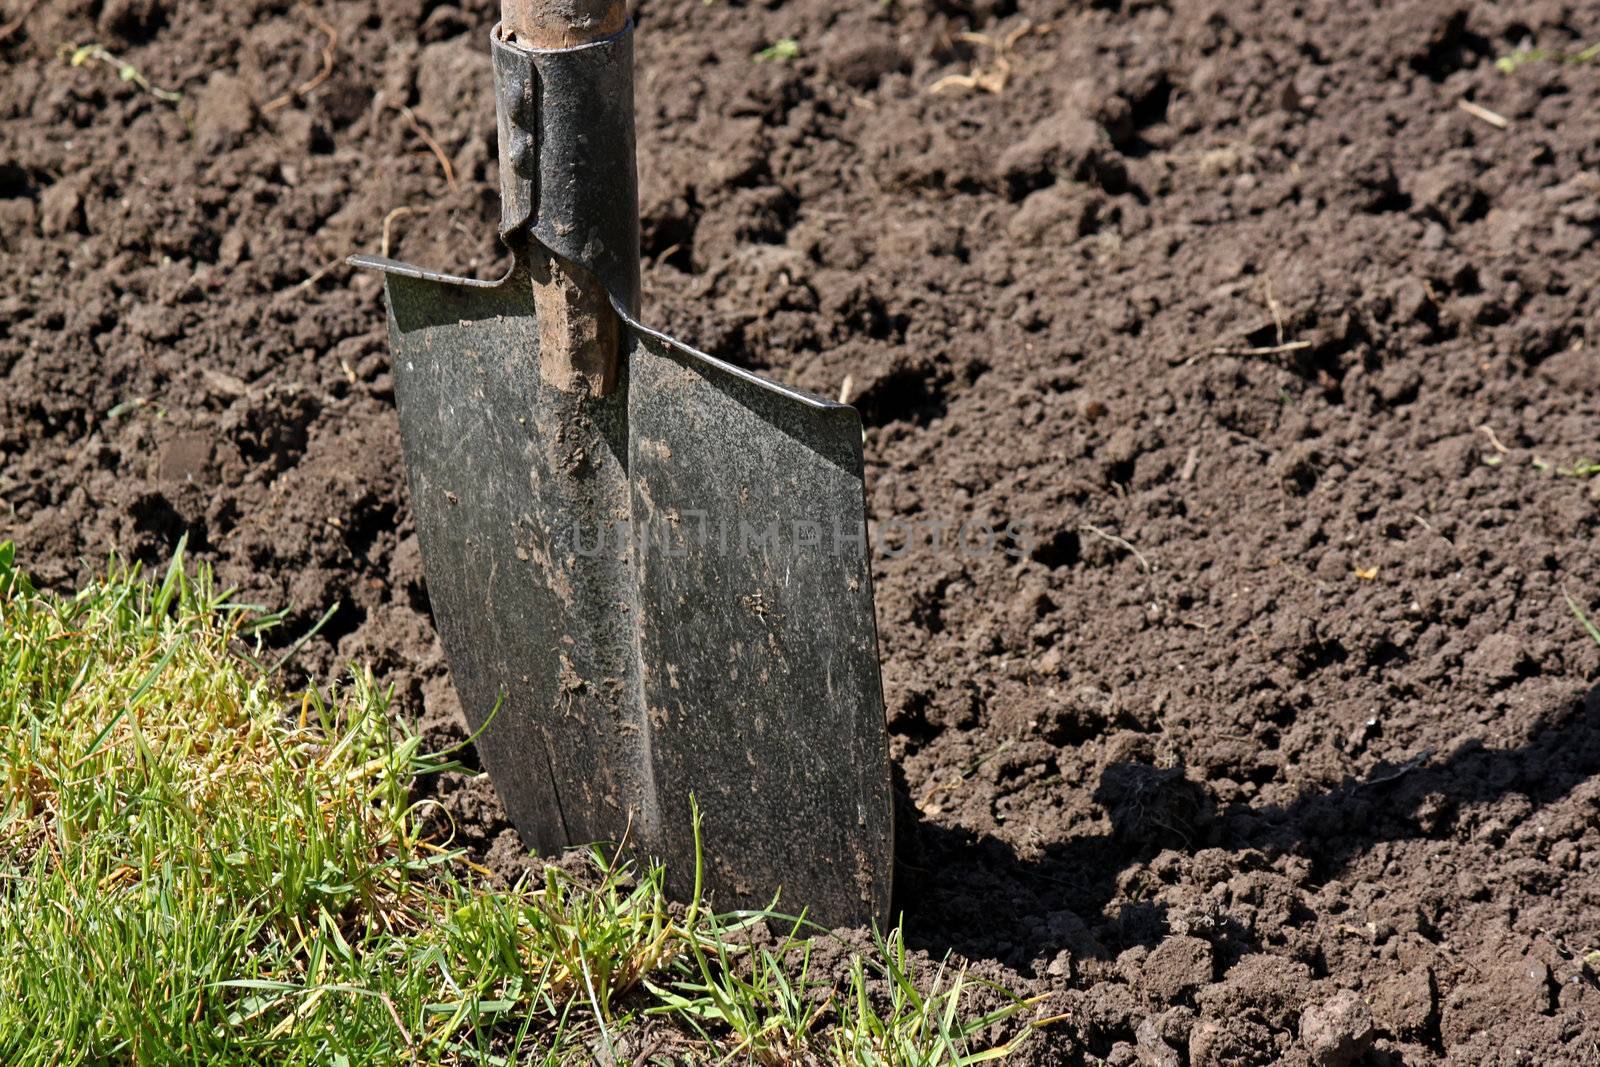 close up of shovel in a ground